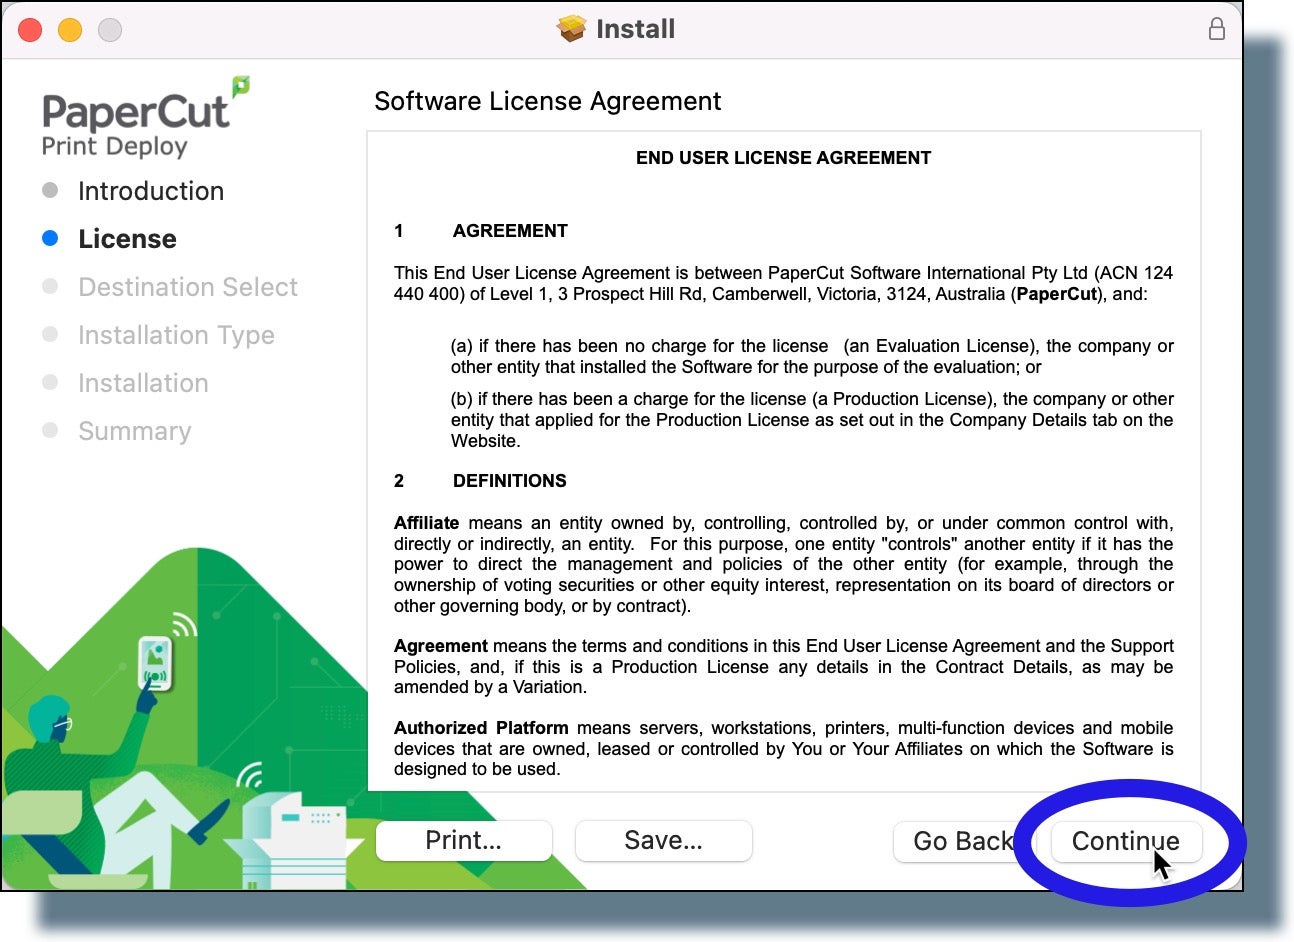 Window showing PaperCut software license agreement.